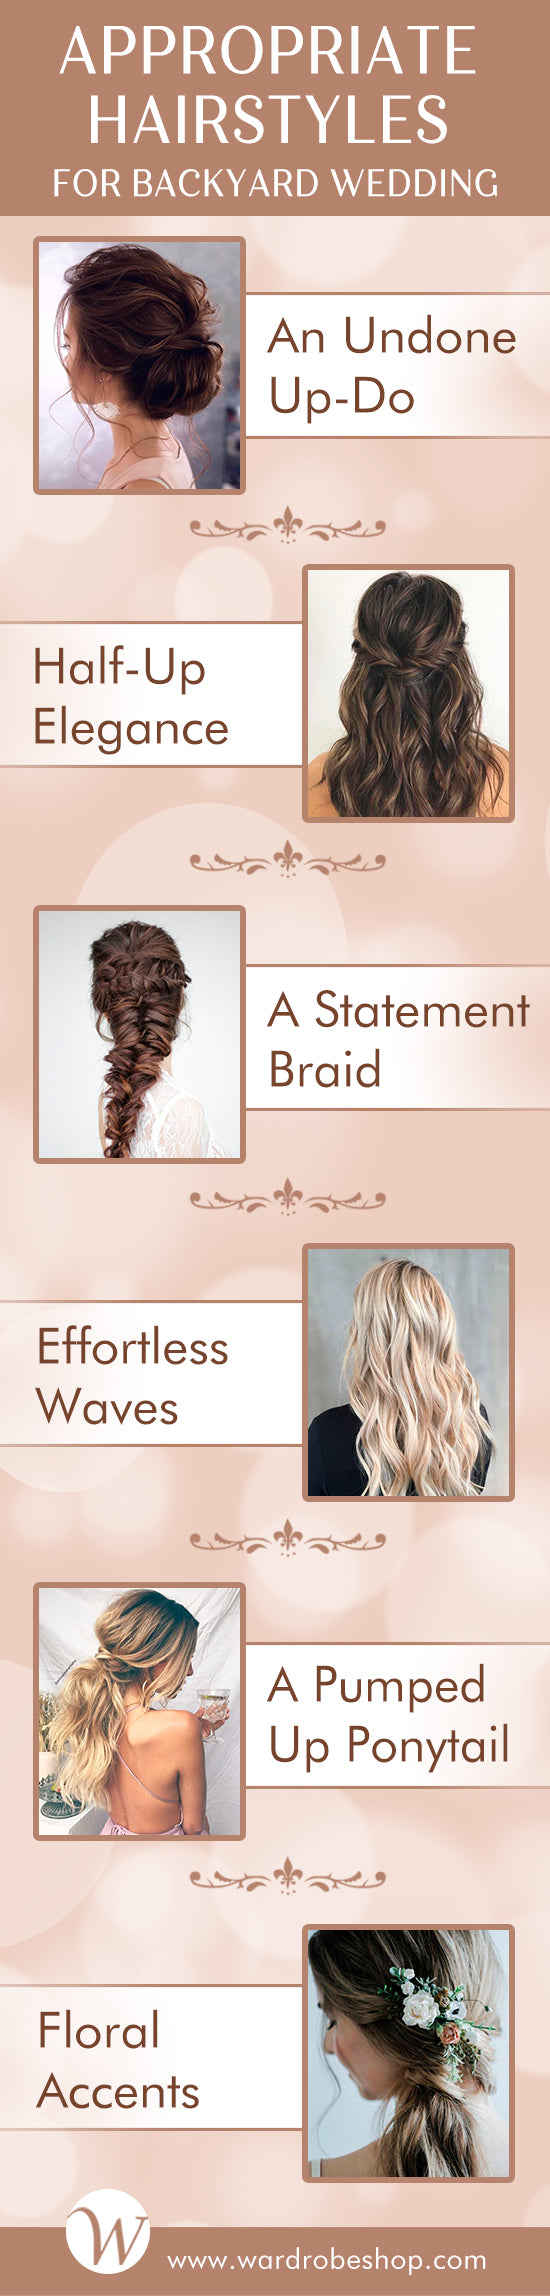 Appropriate Hairstyles for Backyard Wedding Infographic